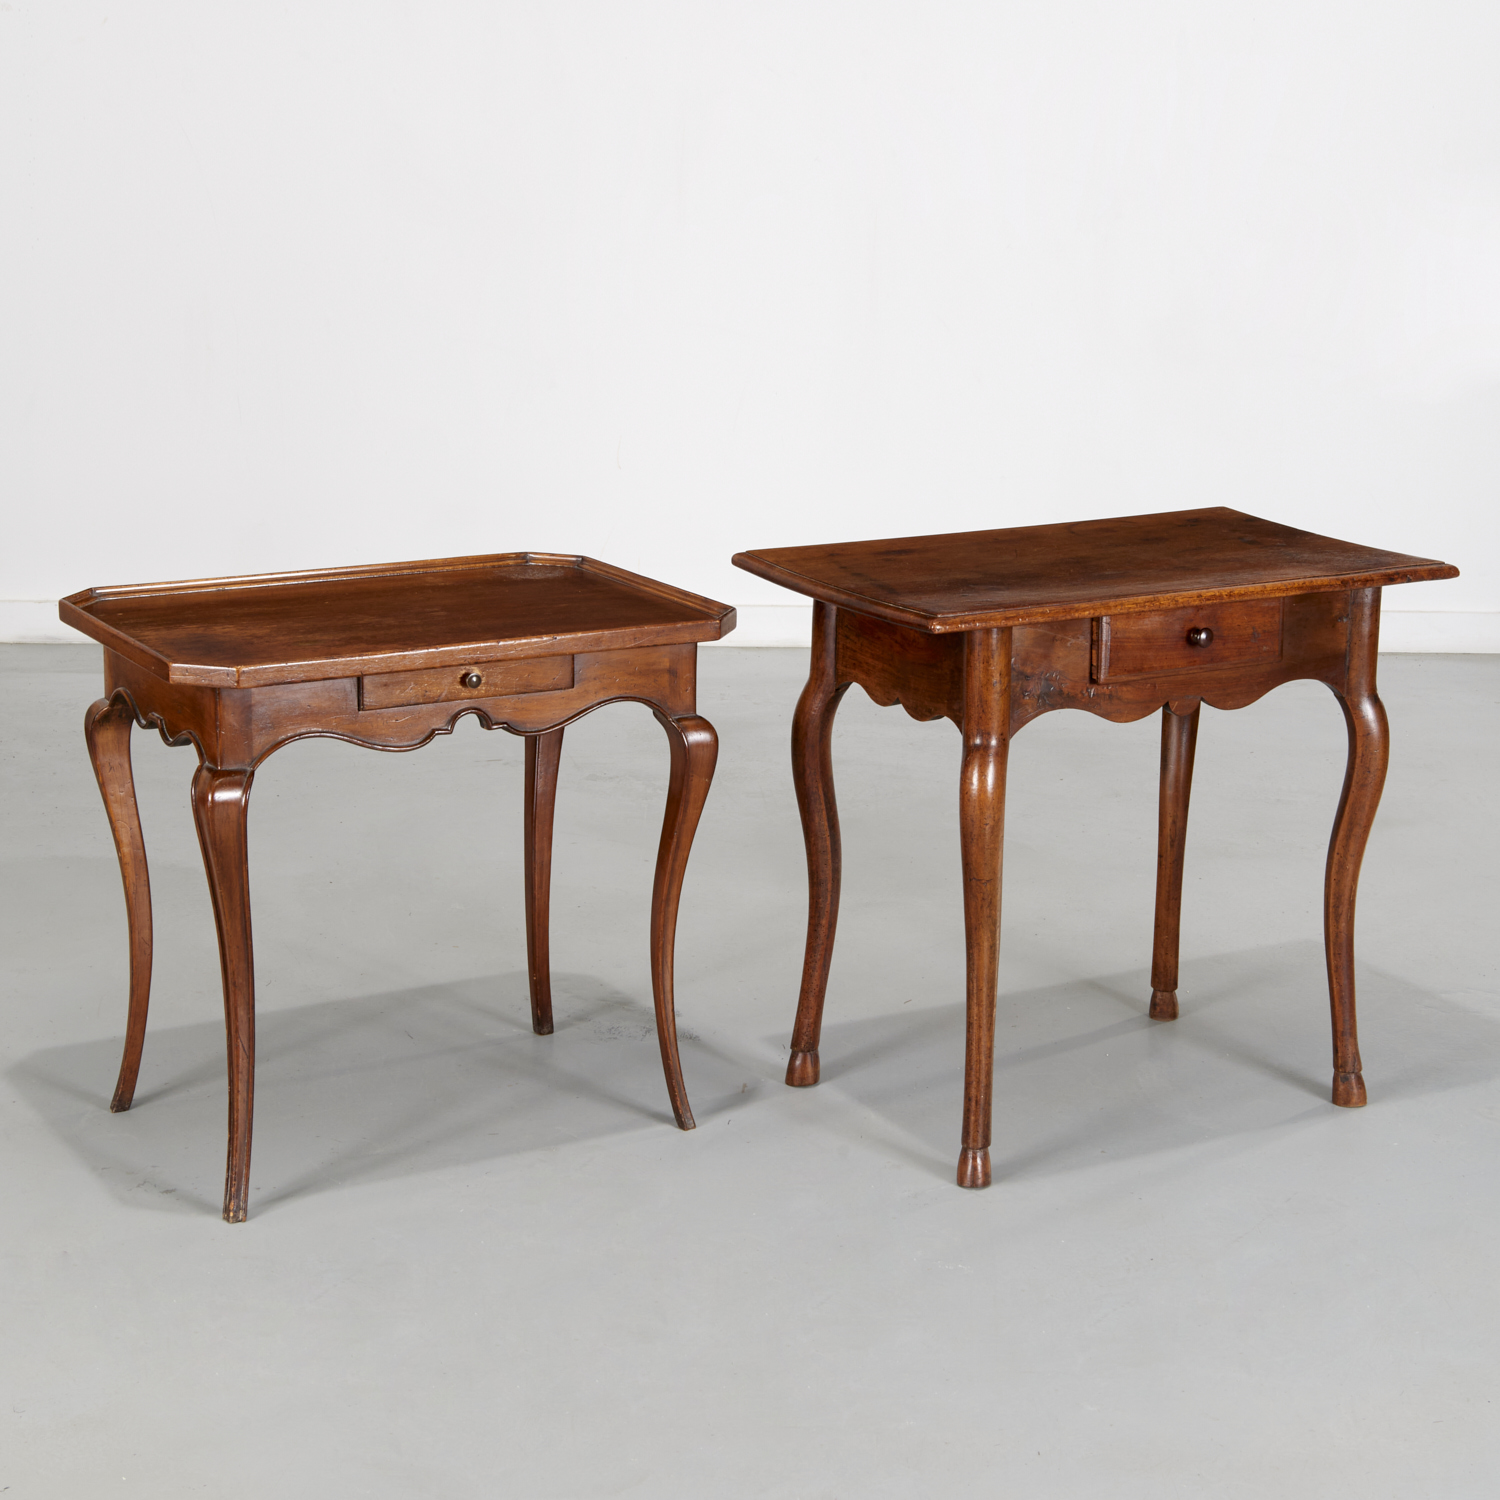 (2) PROVINCIAL FRENCH SIDE TABLES